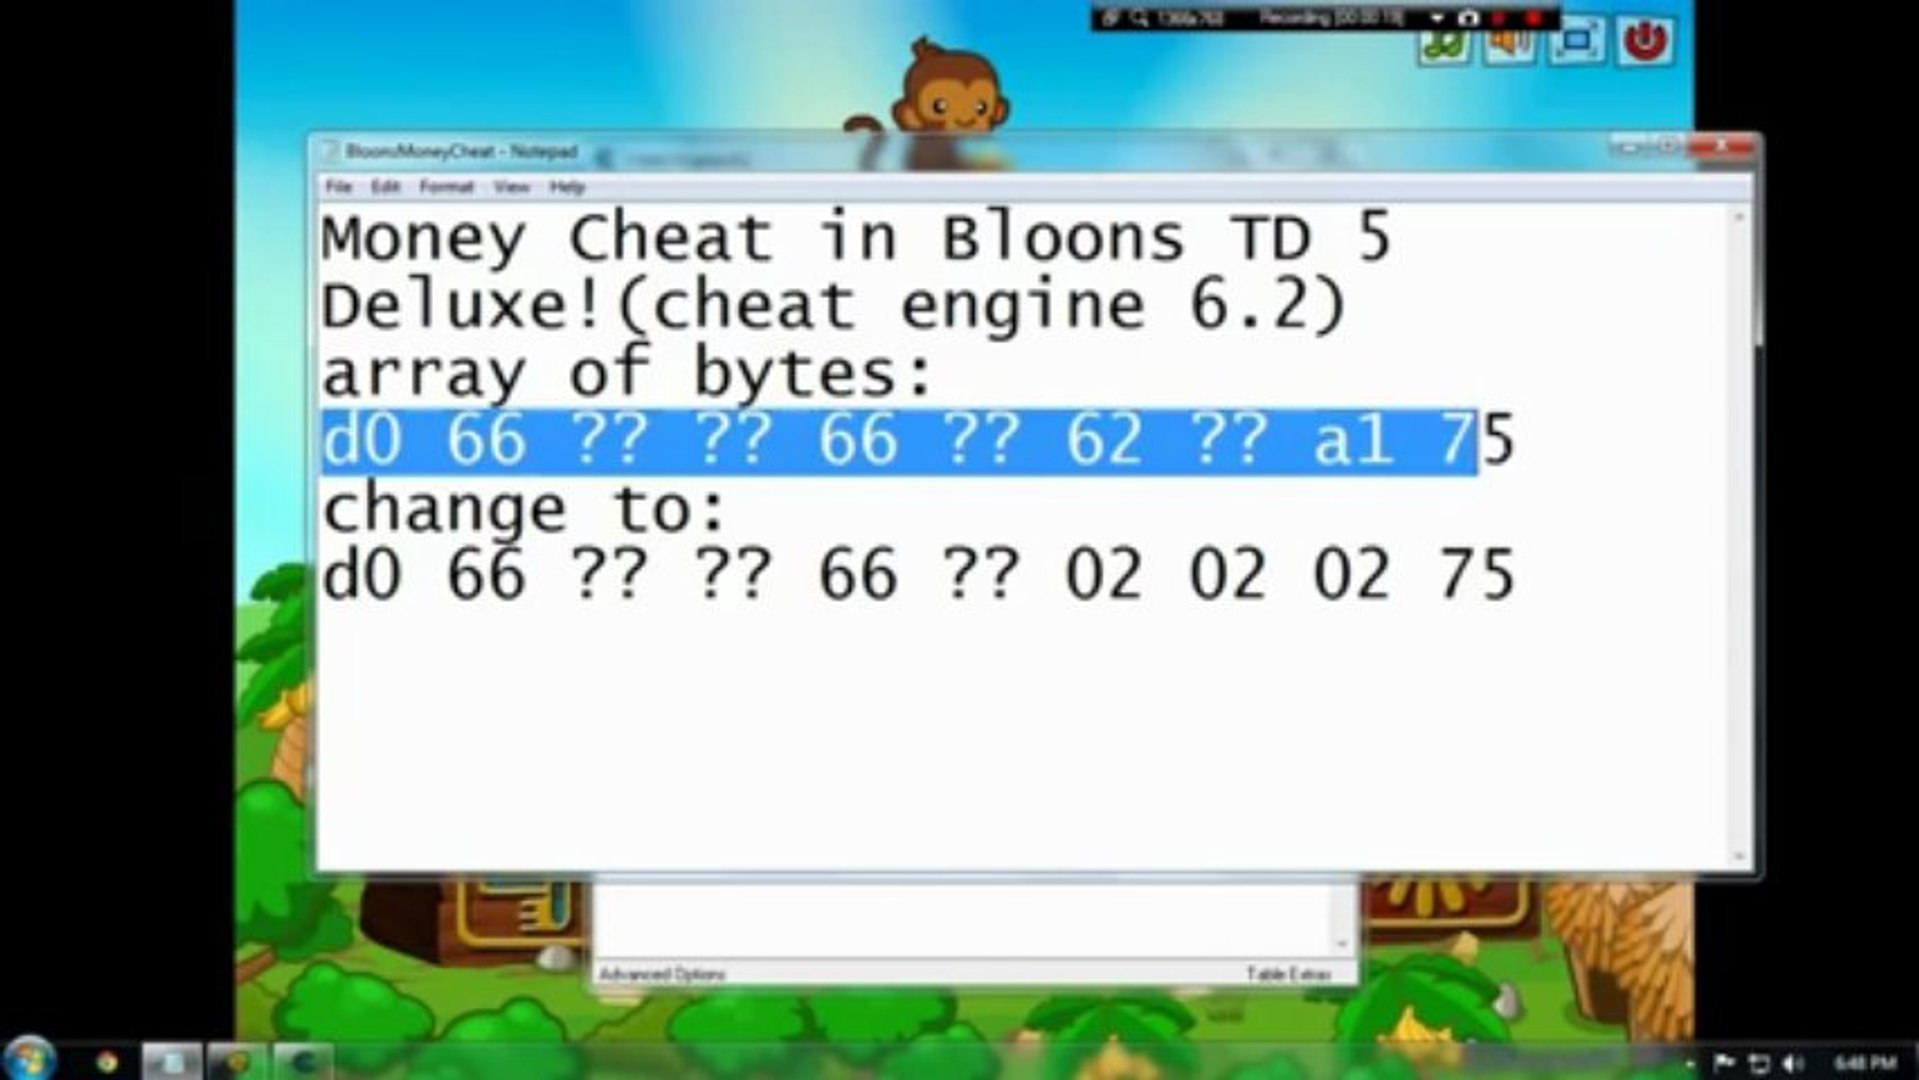 Bloons Td5 Deluxe Money Cheat Cheat Engine 6 2 And Crack Included Video Dailymotion